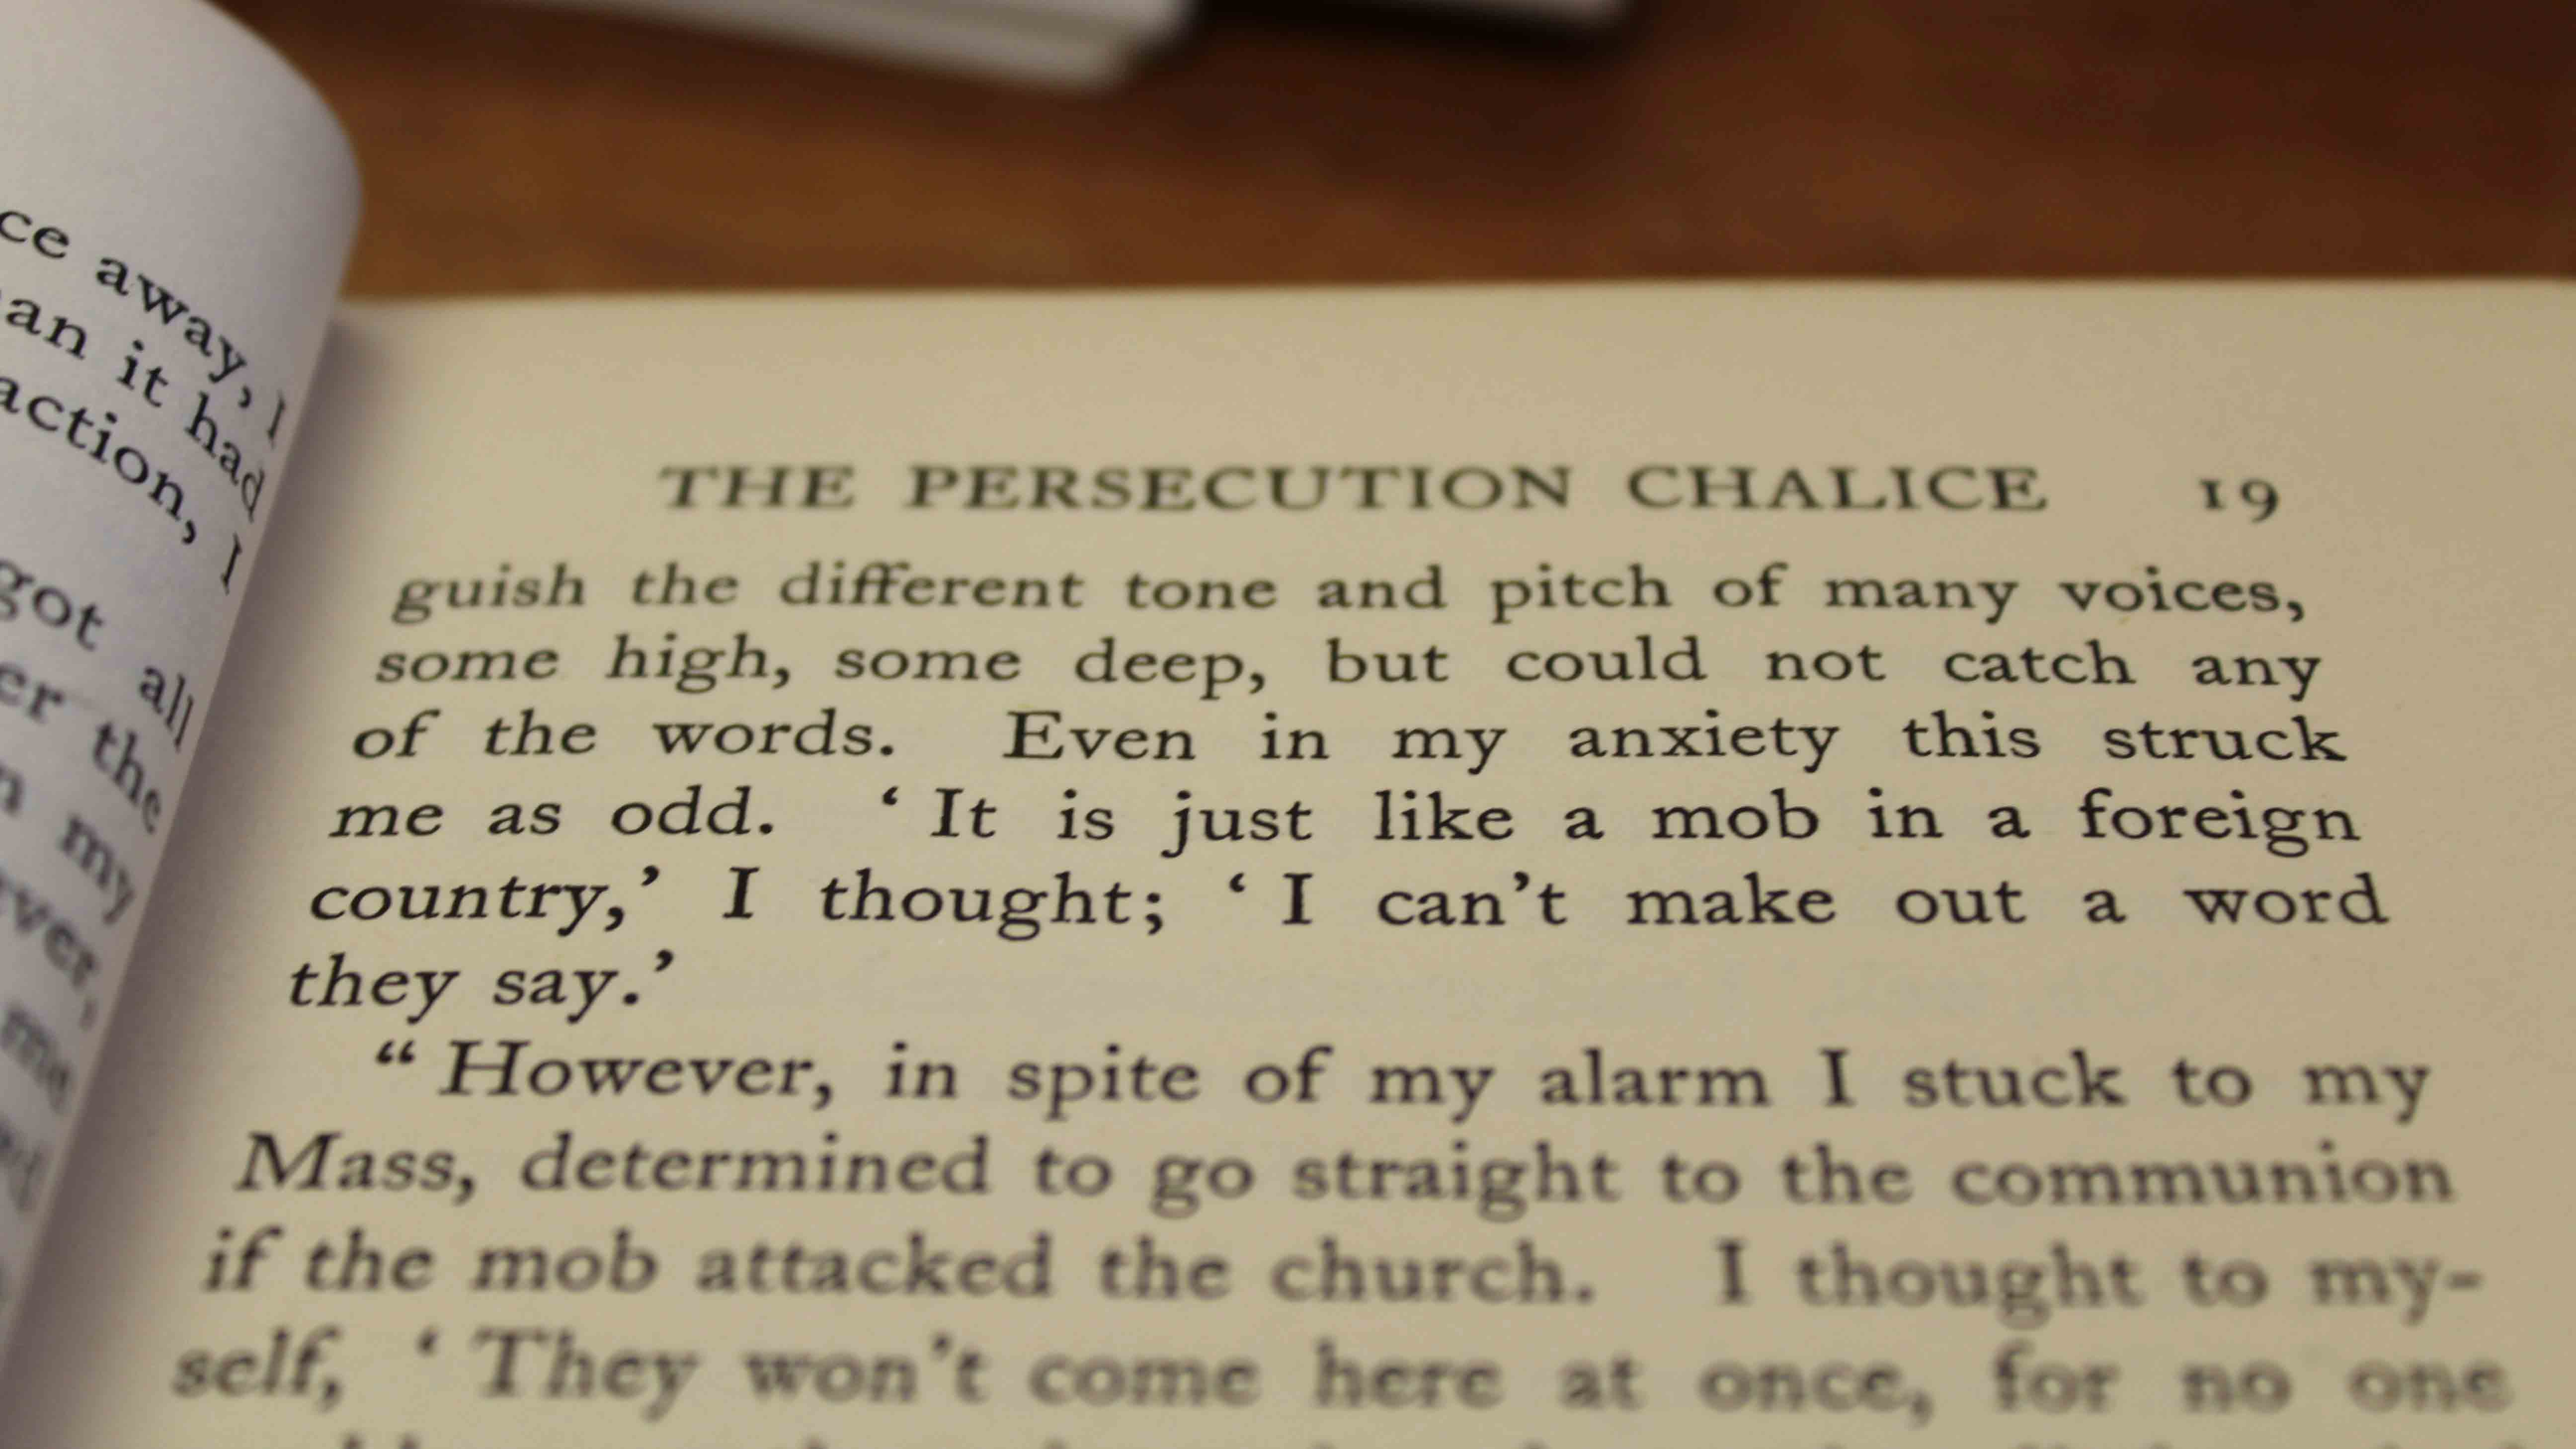 'The Persecution Chalice'